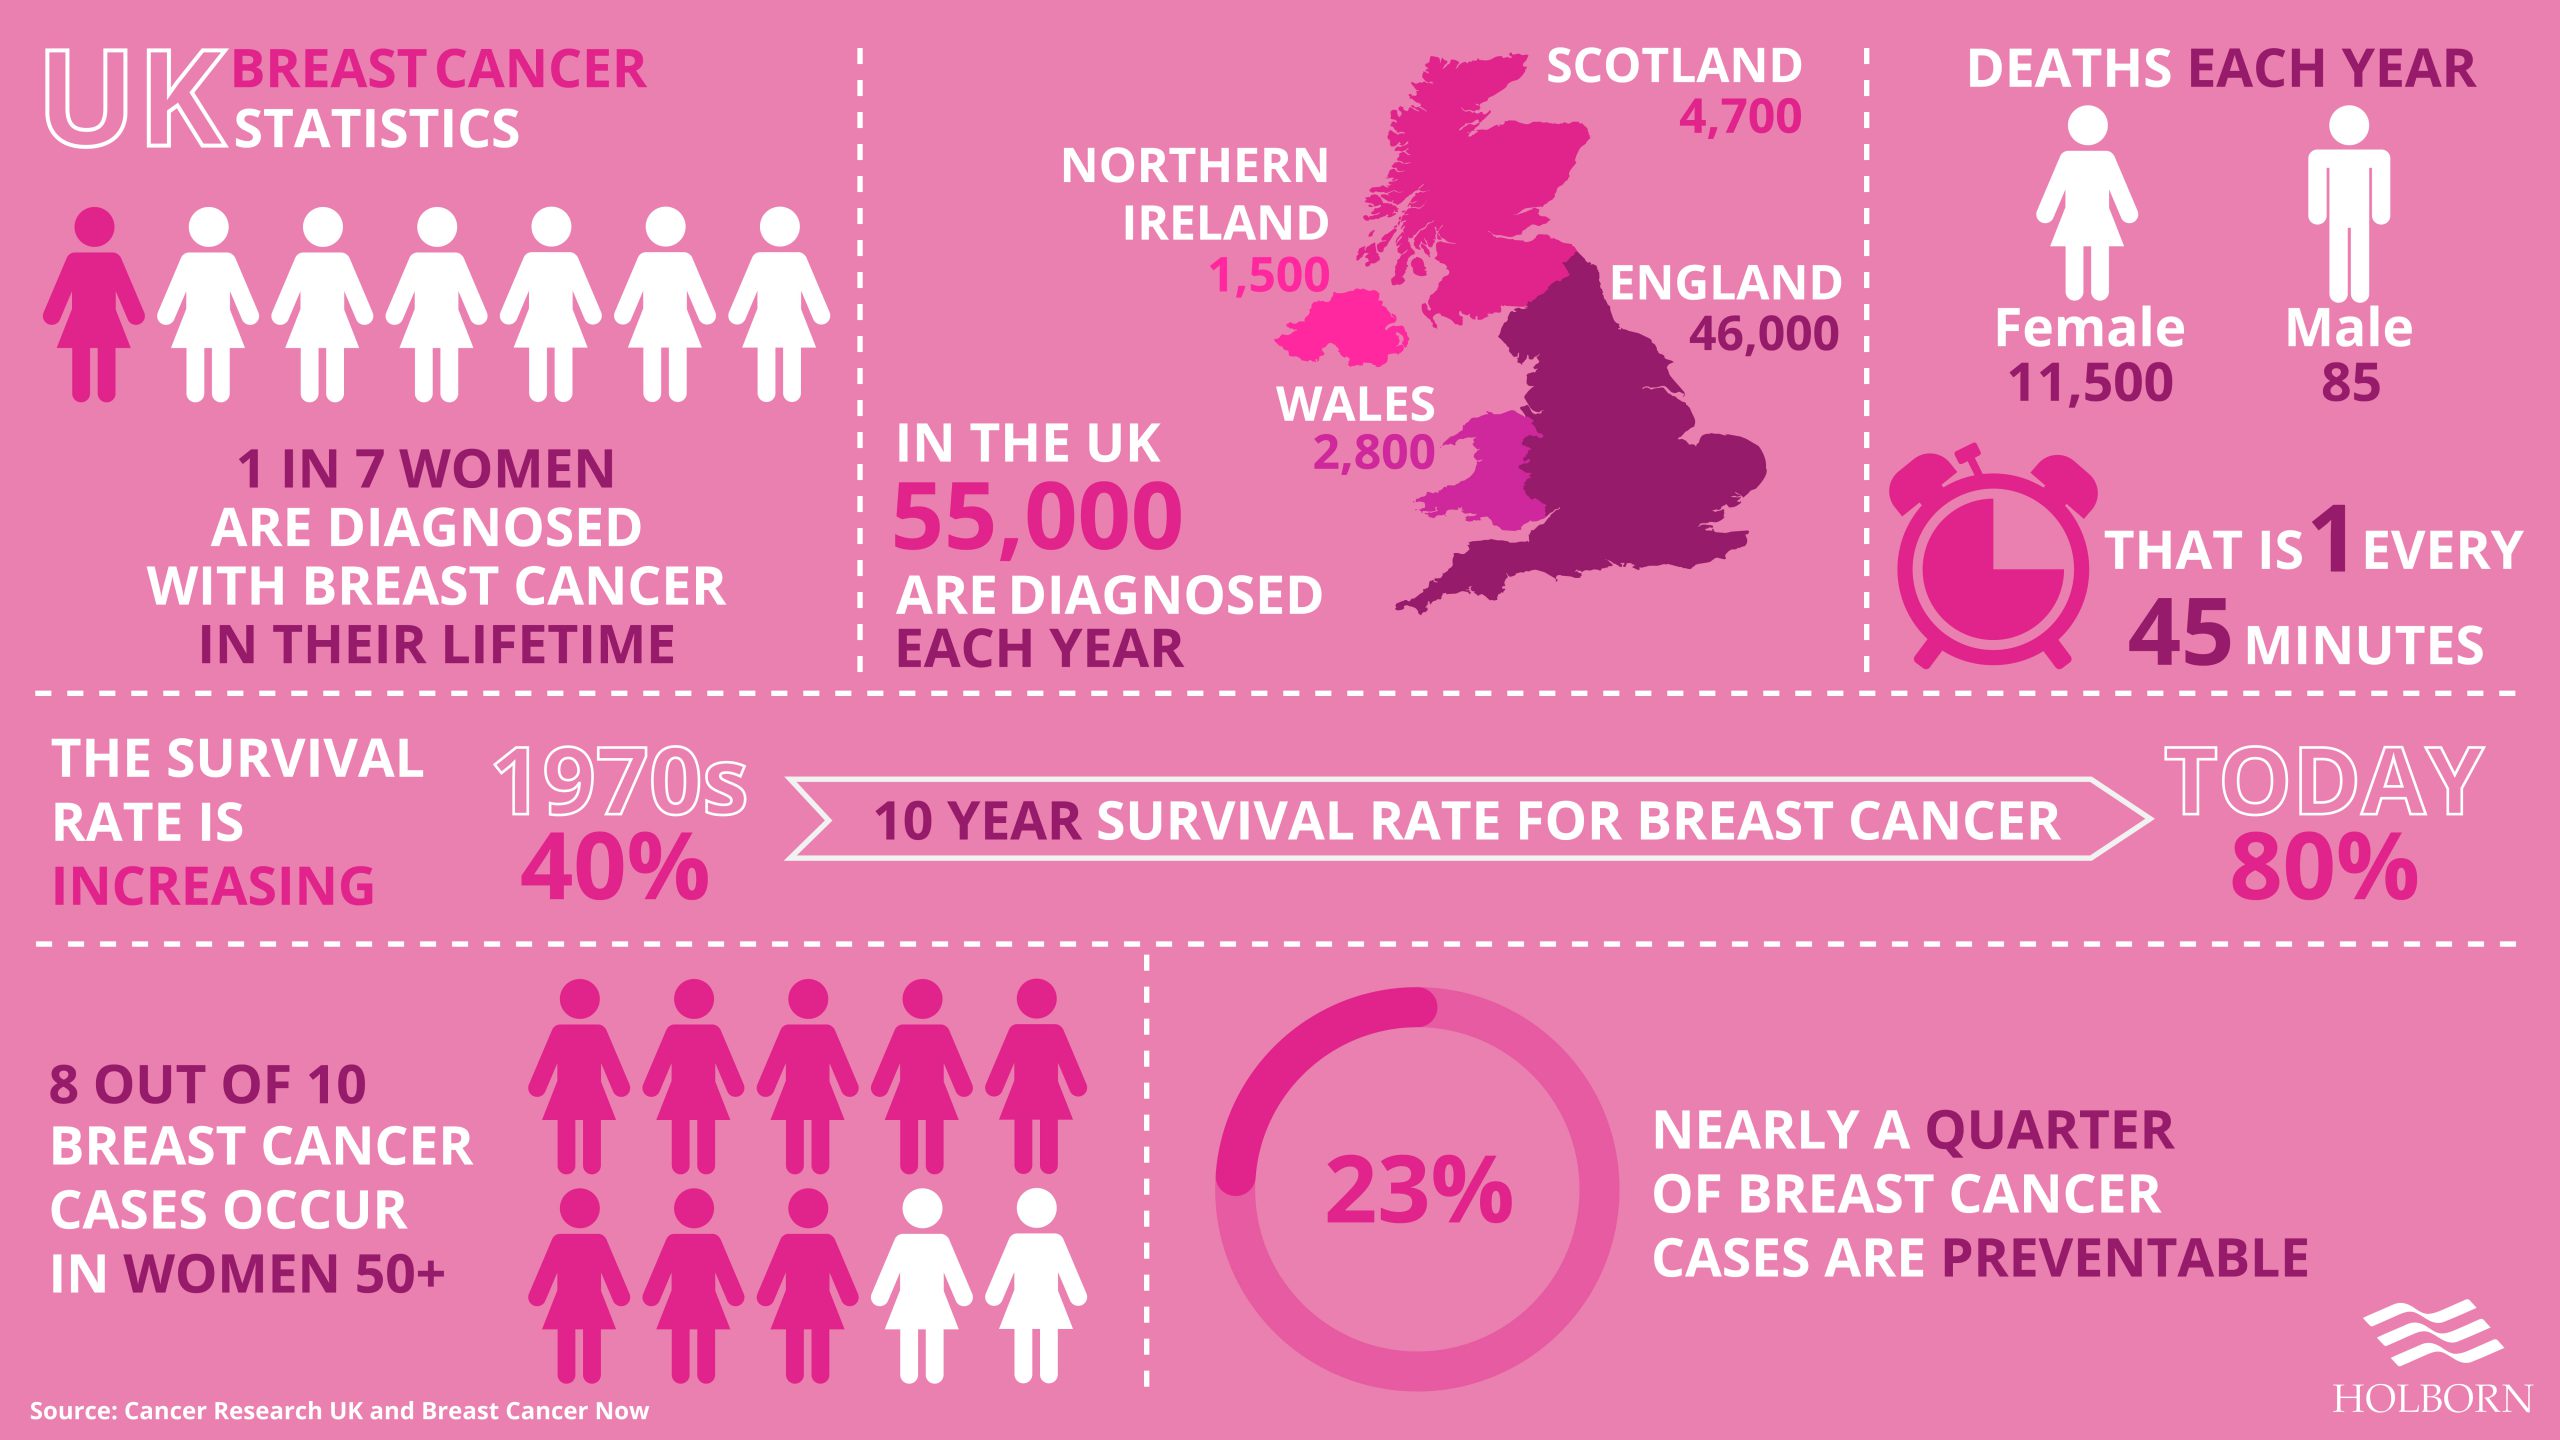 Breast cancer statistics for the UK